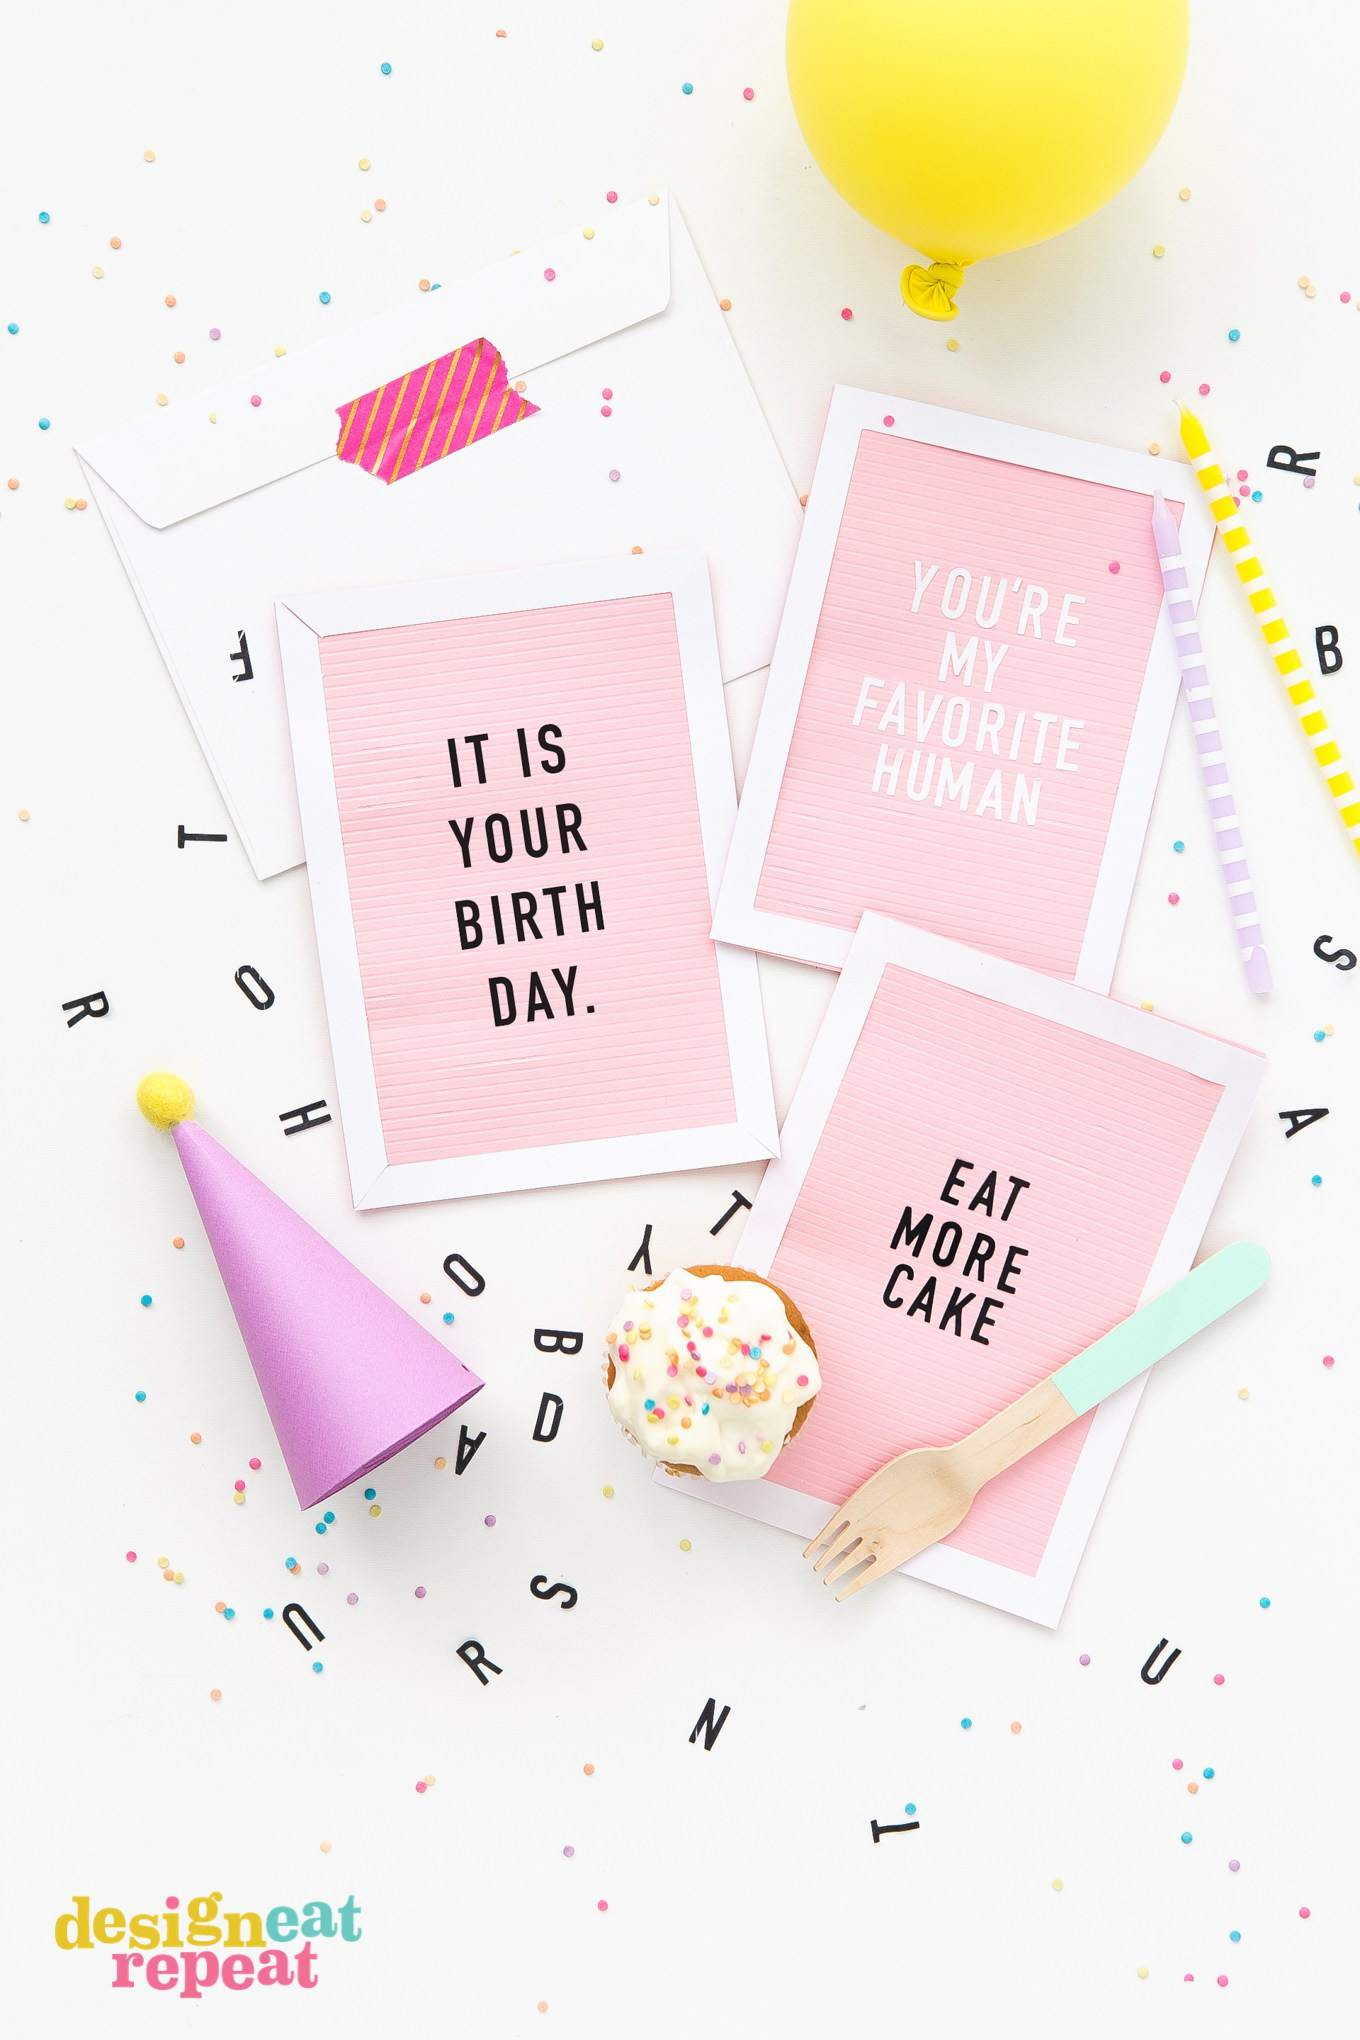 Handmade Birthday Card Ideas For Husband Get Inspiration From 25 Of The Best Diy Birthday Cards